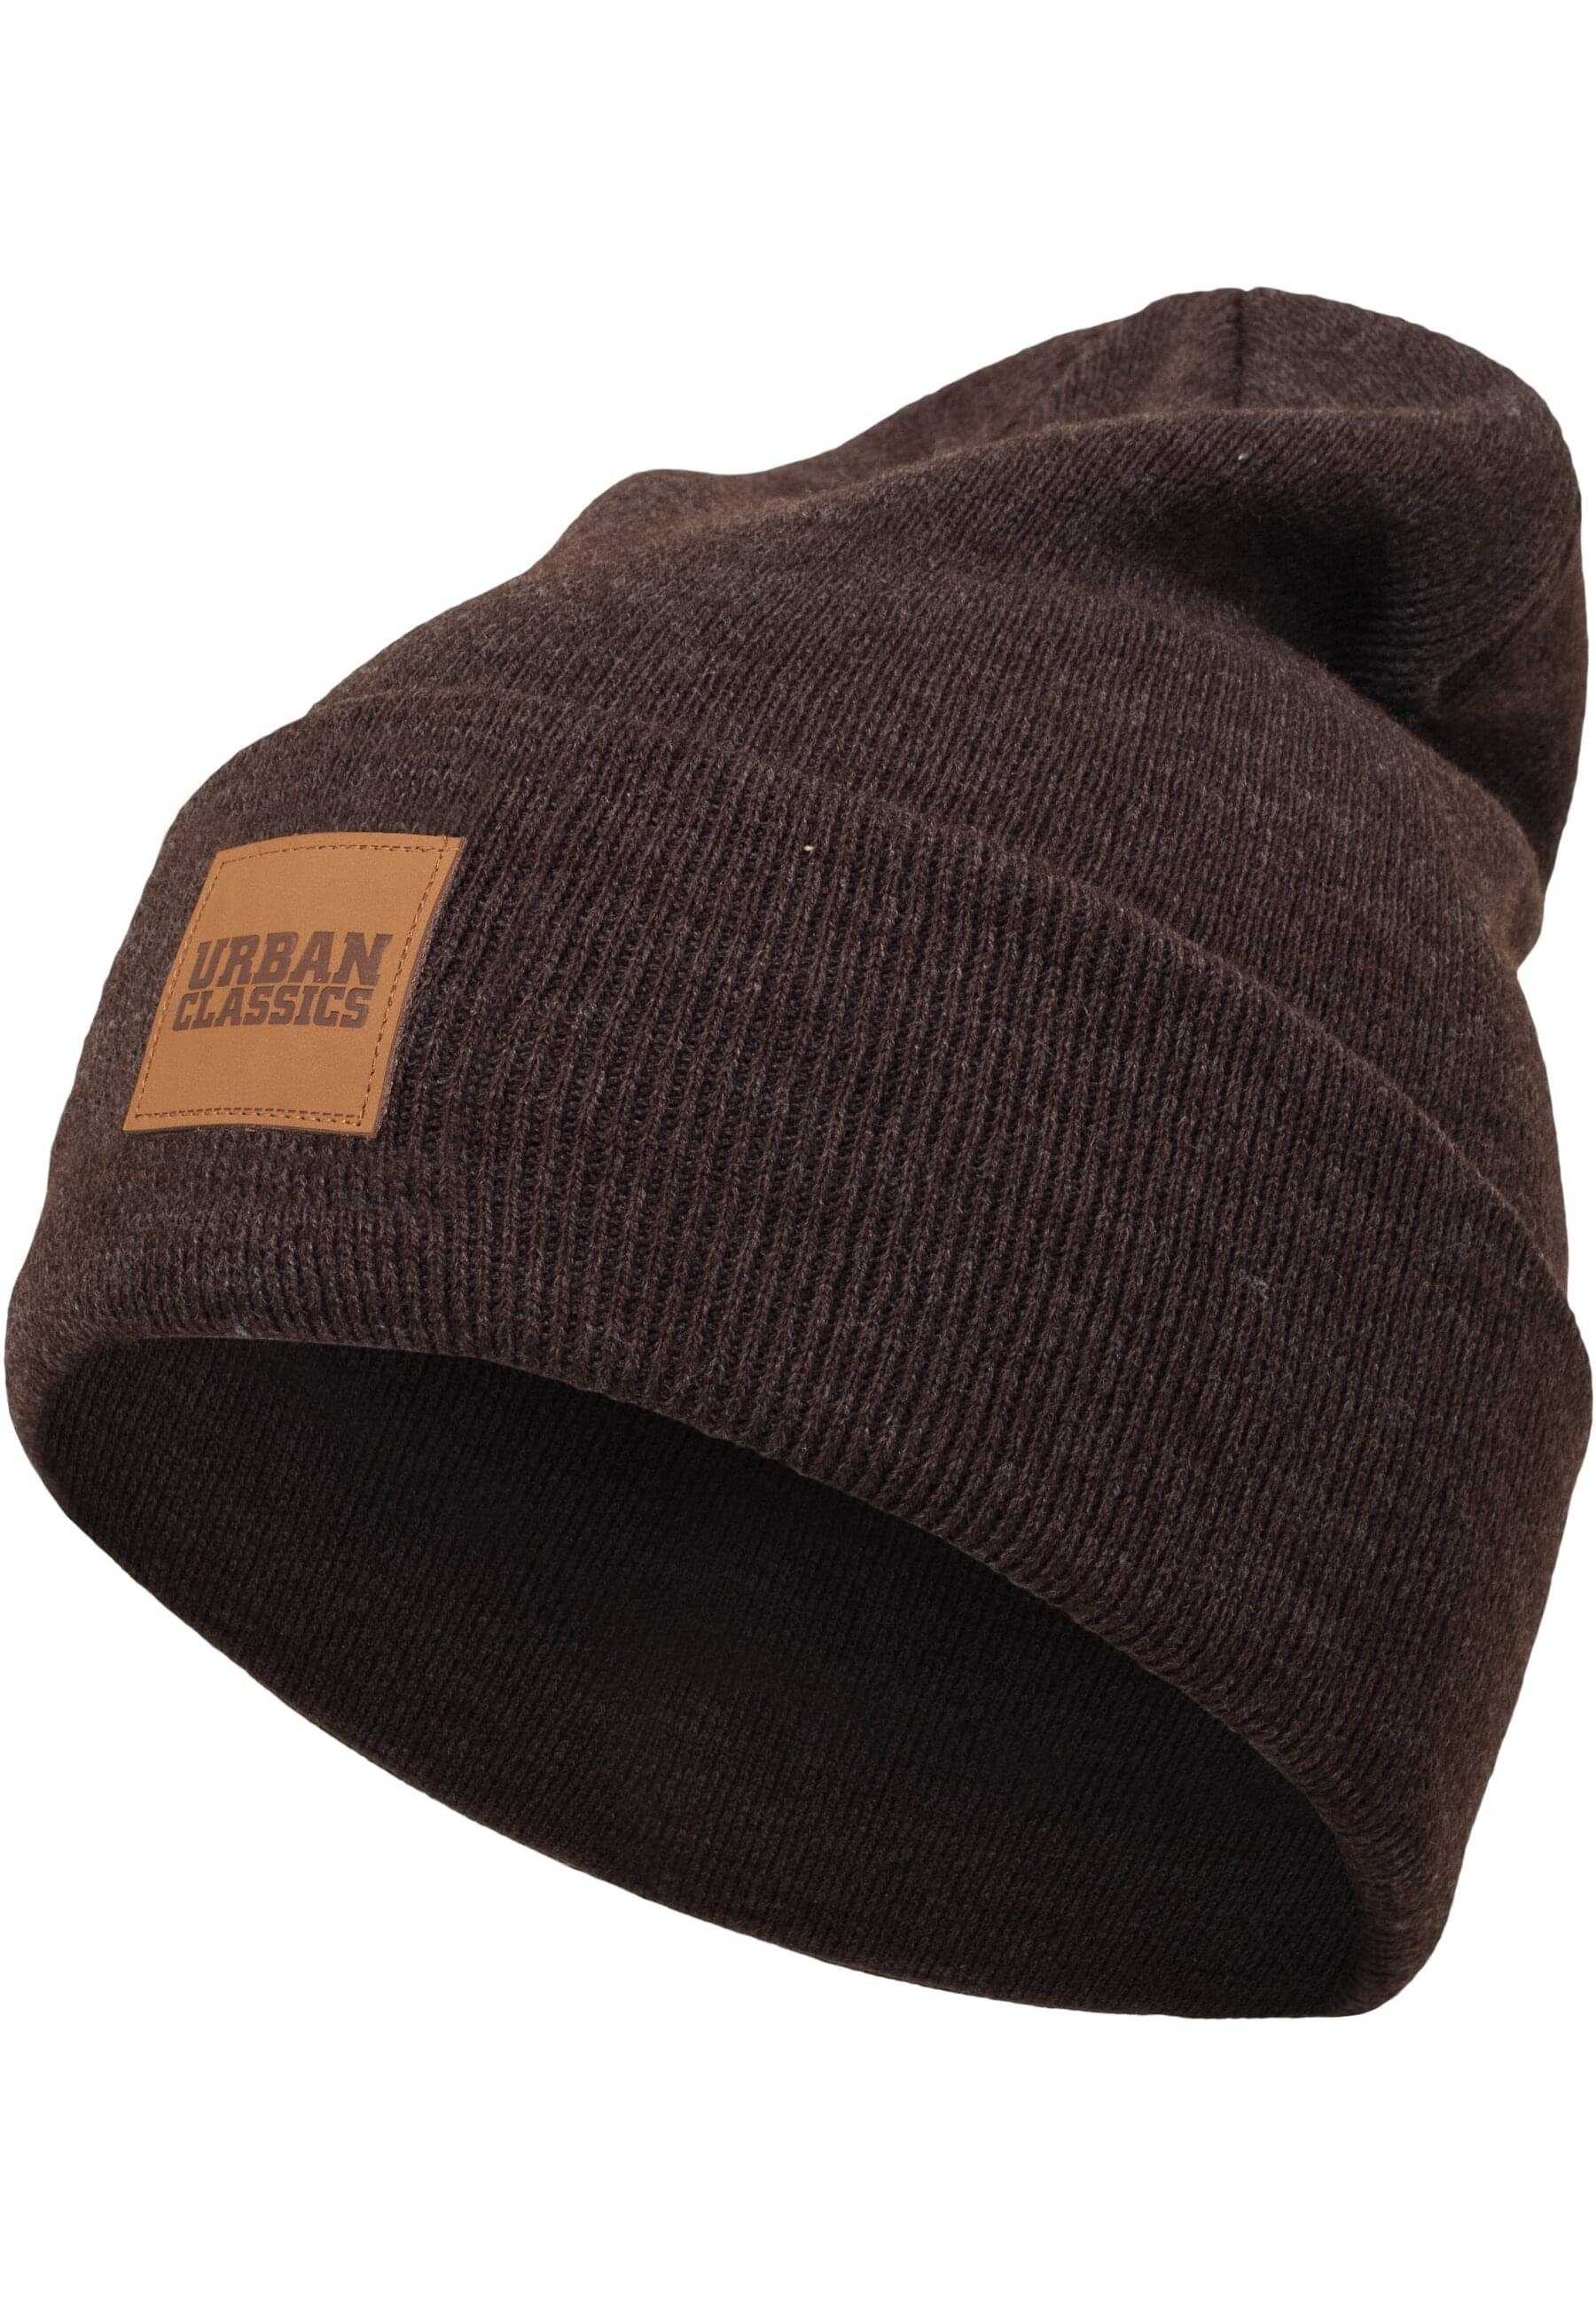 Synthetic heatherbrown Leatherpatch Beanie Long Beanie CLASSICS URBAN Unisex (1-St)